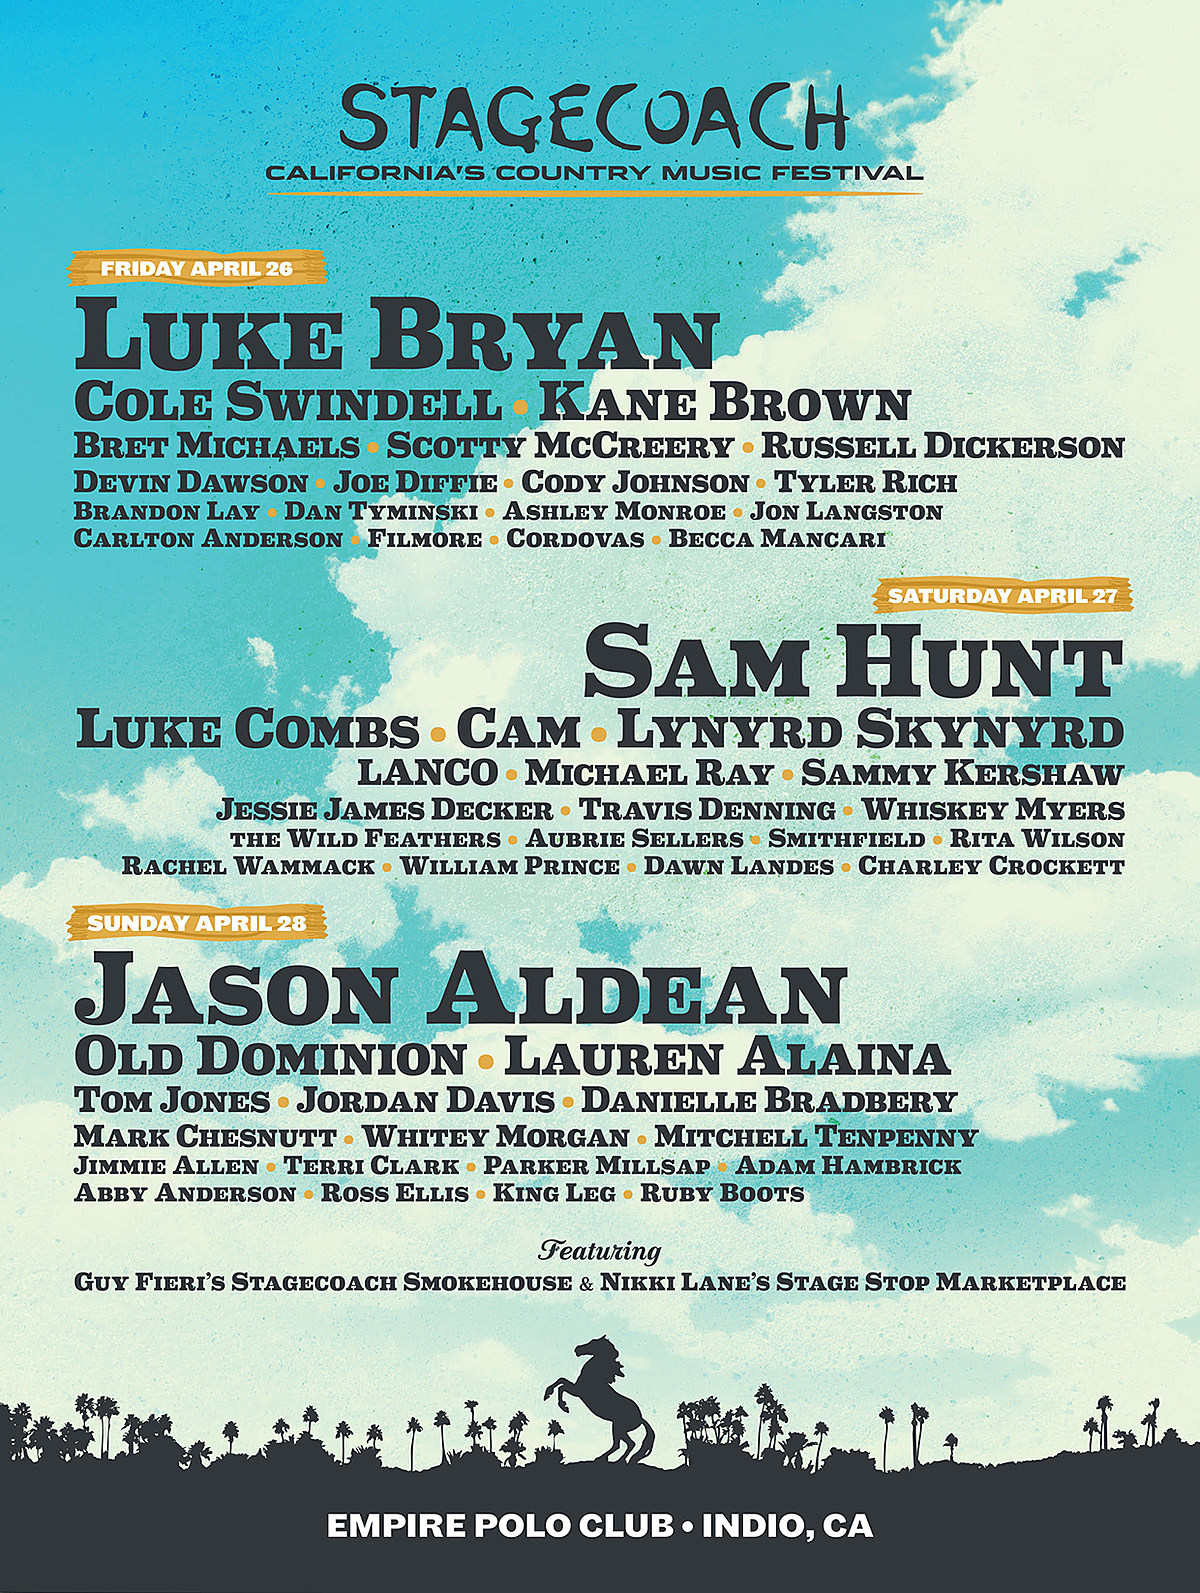 Stagecoach Fest: 2019 lineup & tickets